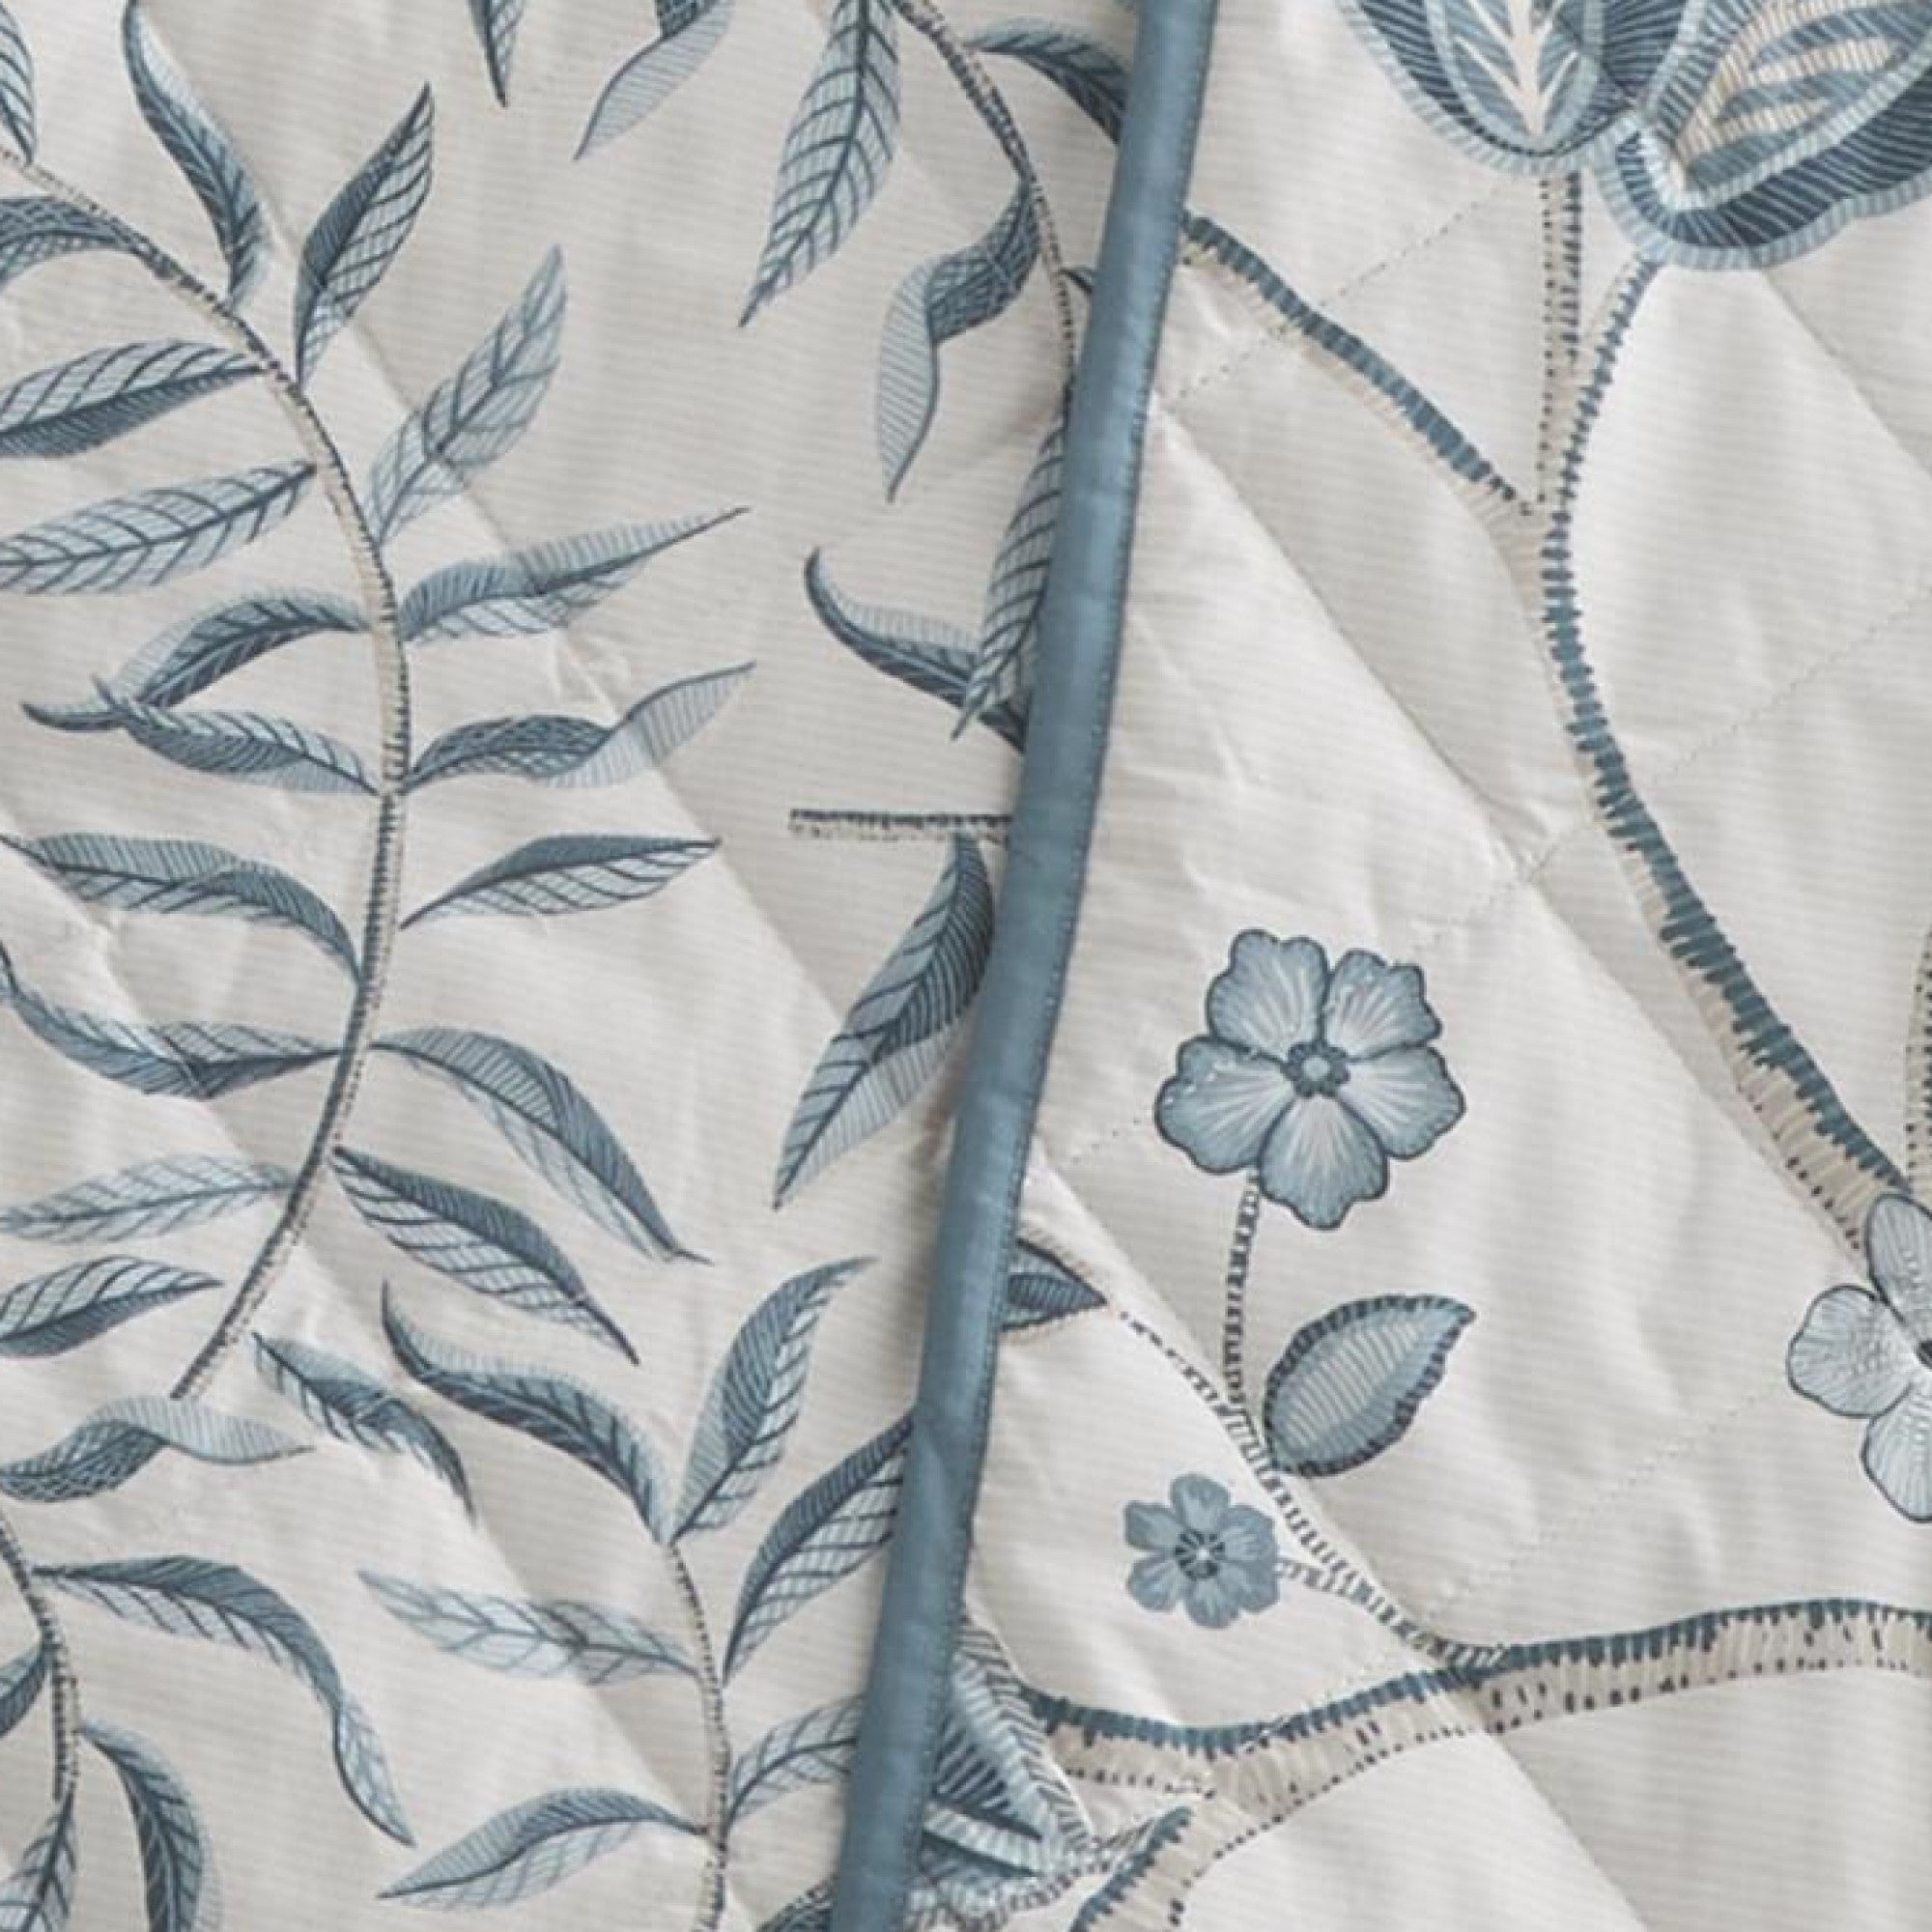 Bedspread Samira by Dreams And Drapes Design in Teal